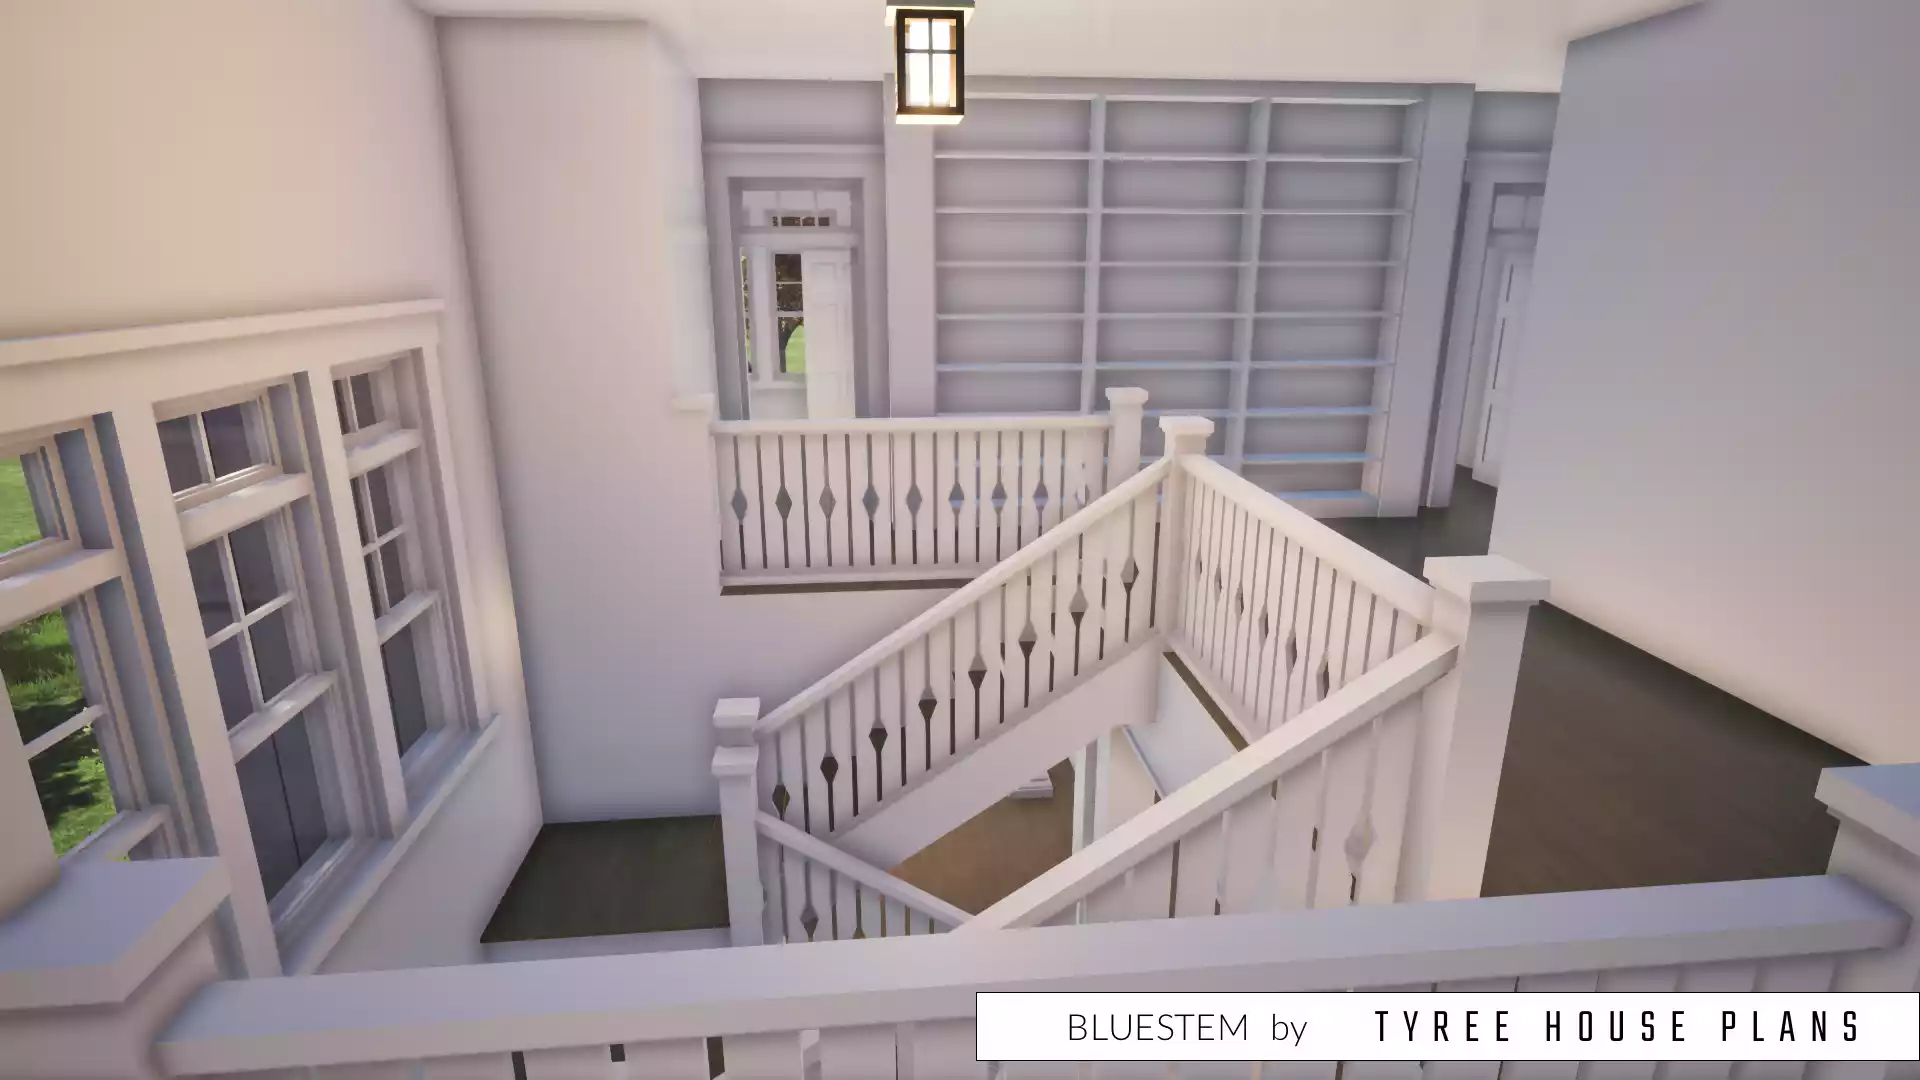 Stairwell with decorative railing and built-in bookshelves. Bluestem by Tyree House Plans.